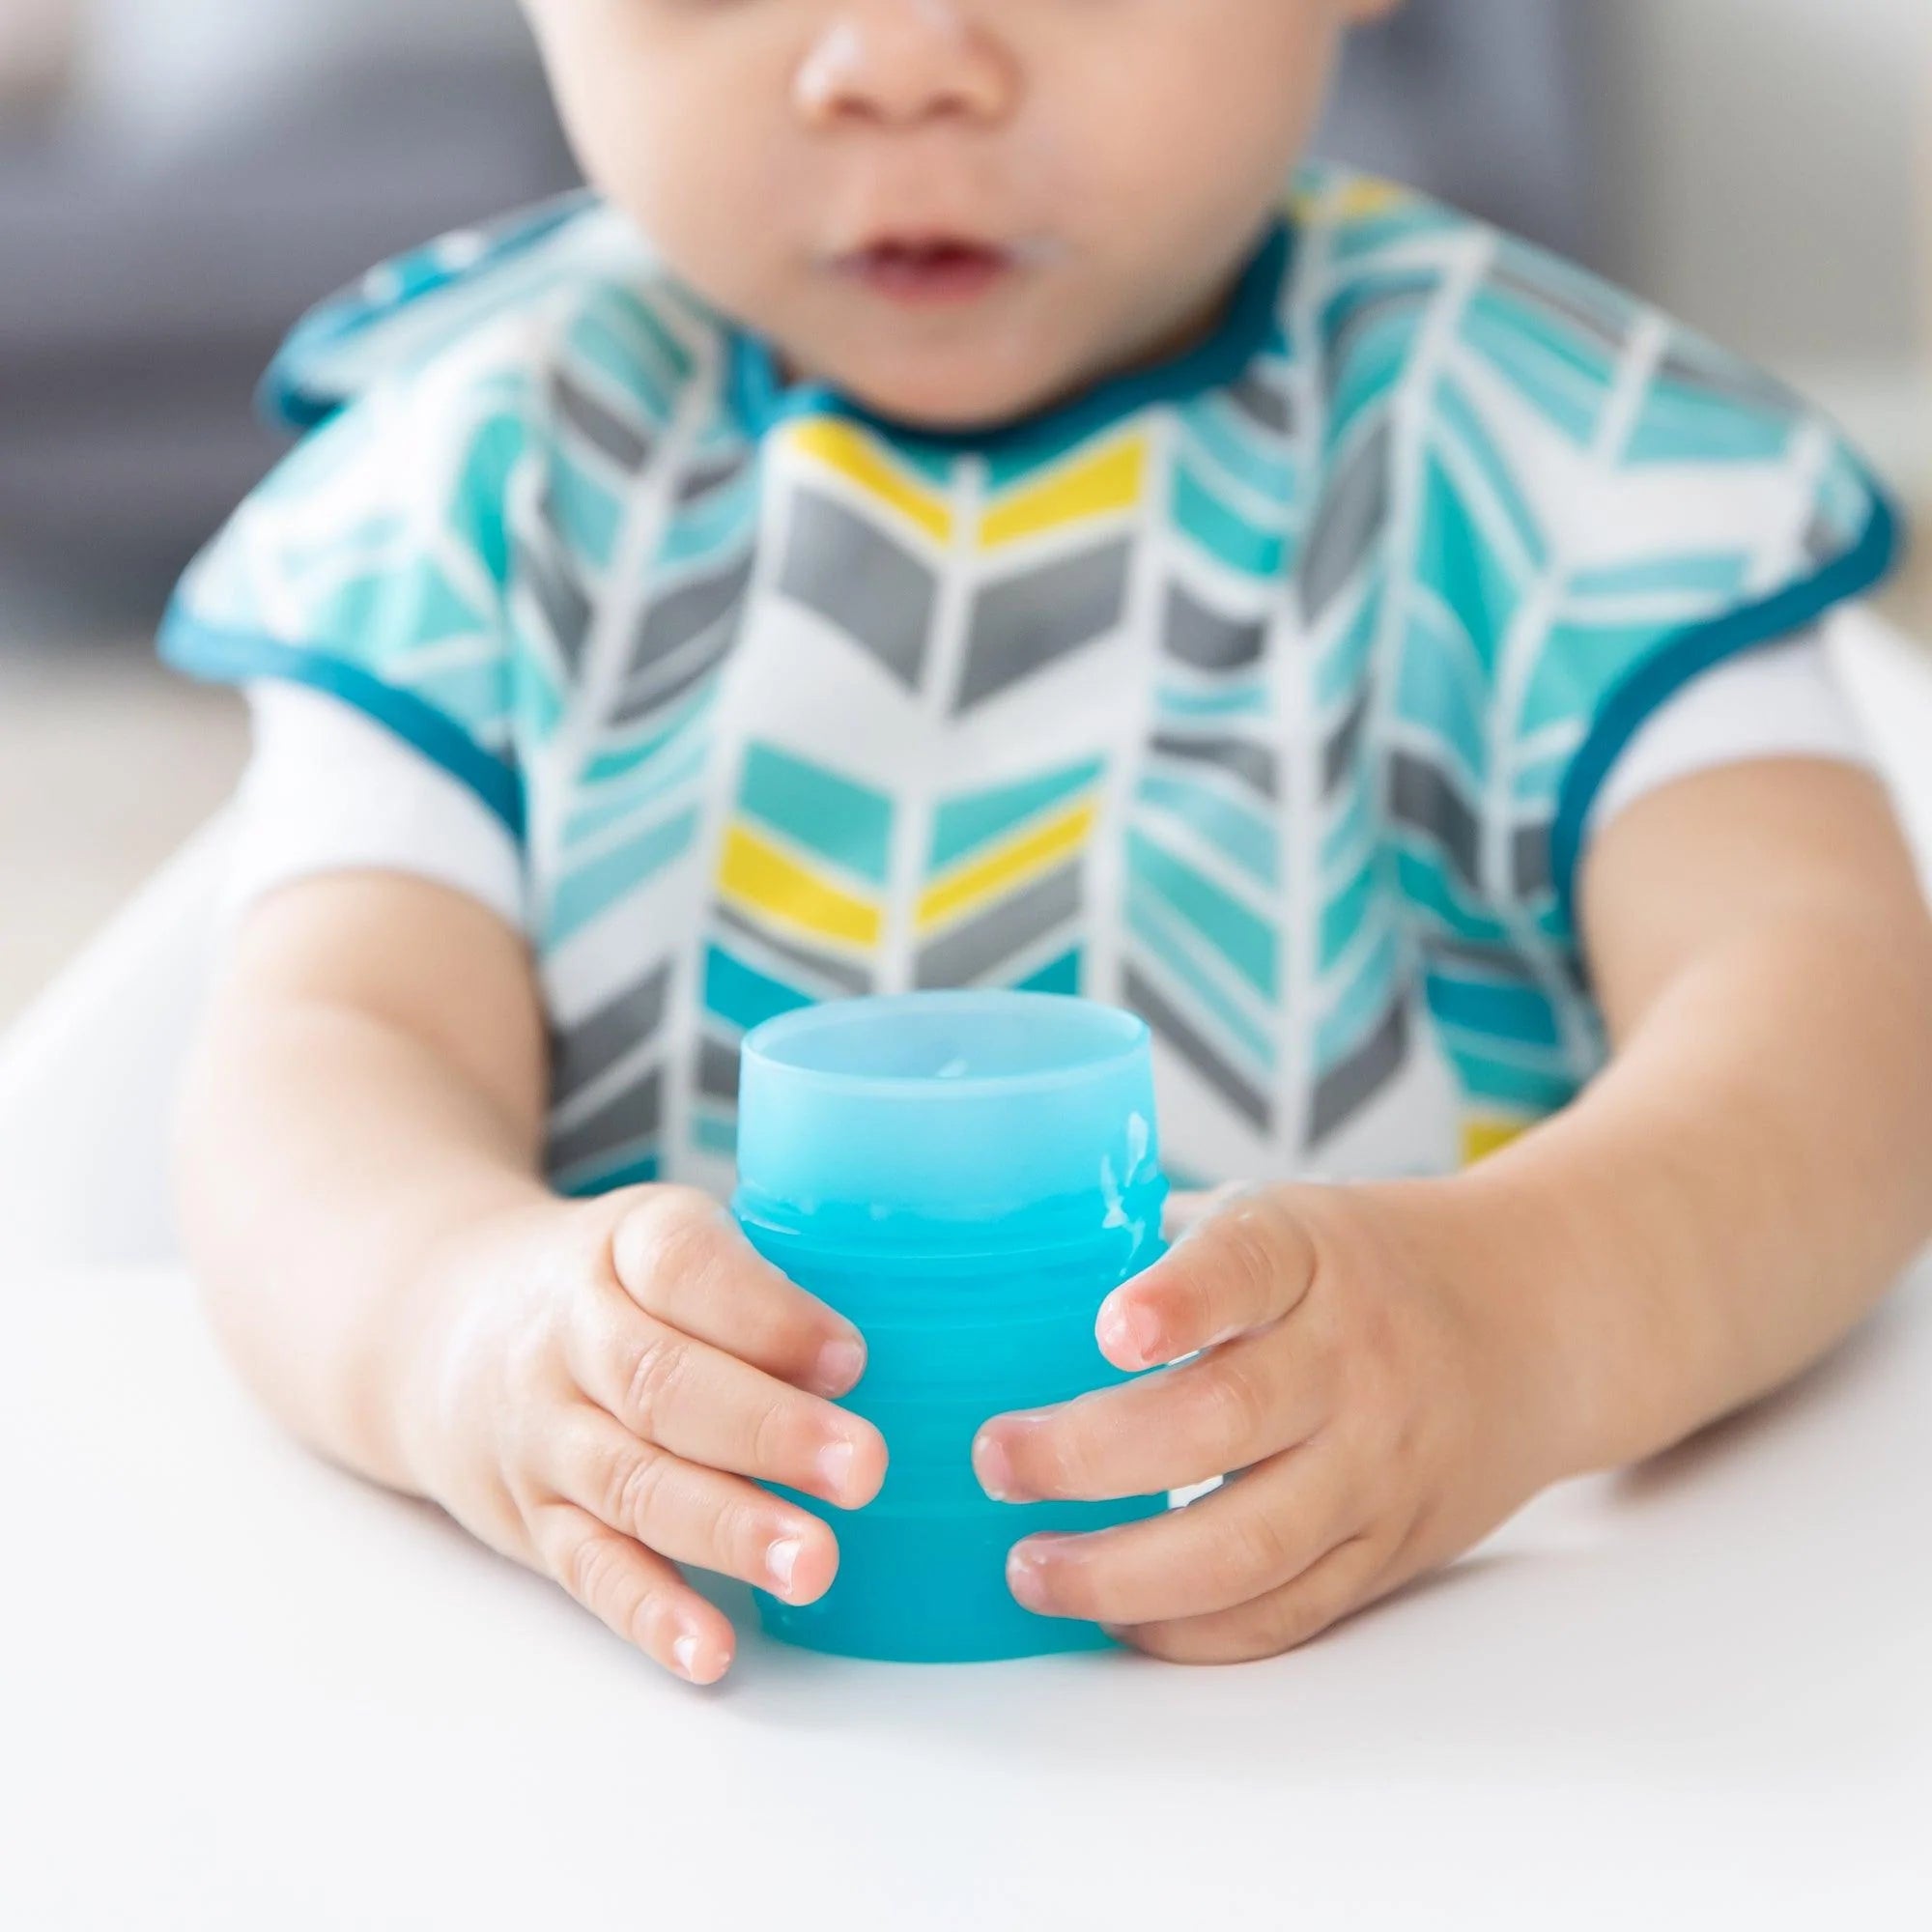 Is My Baby Ready to Drink From a Cup?